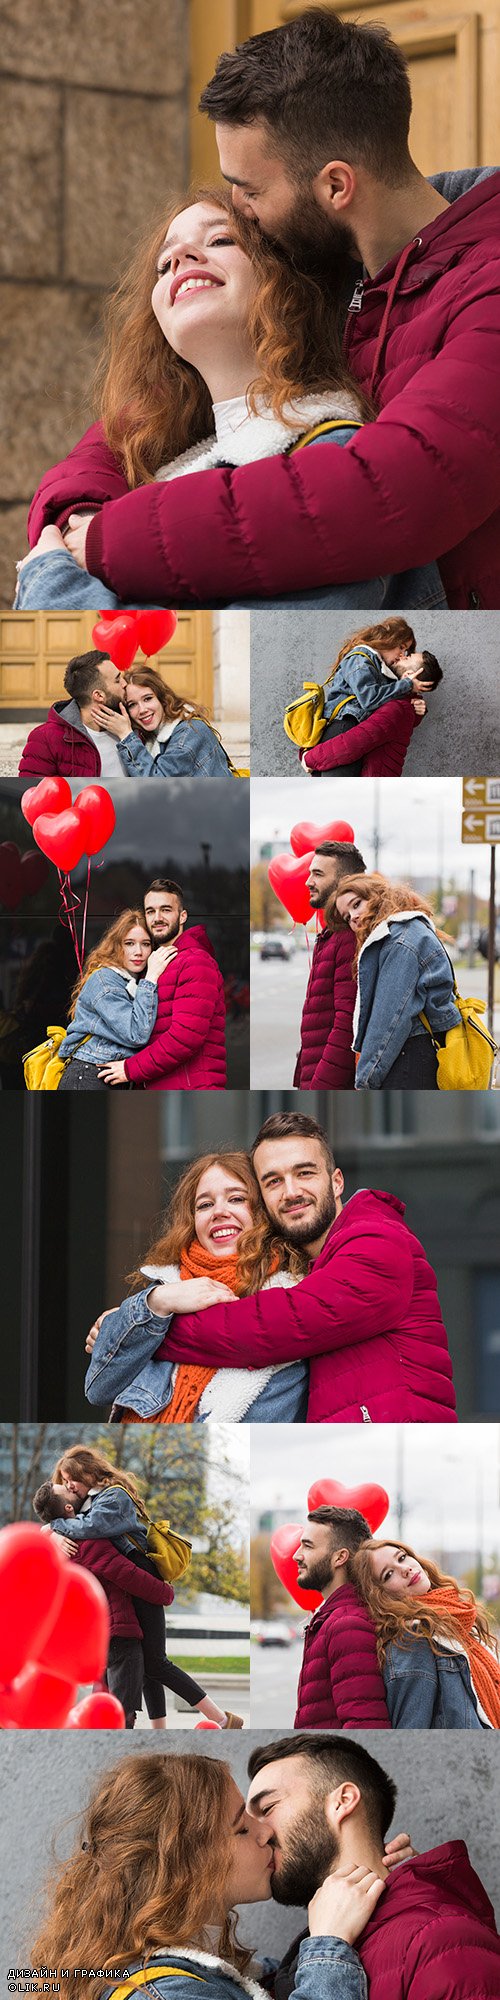 Falling in love and romantic couple on balloon walk